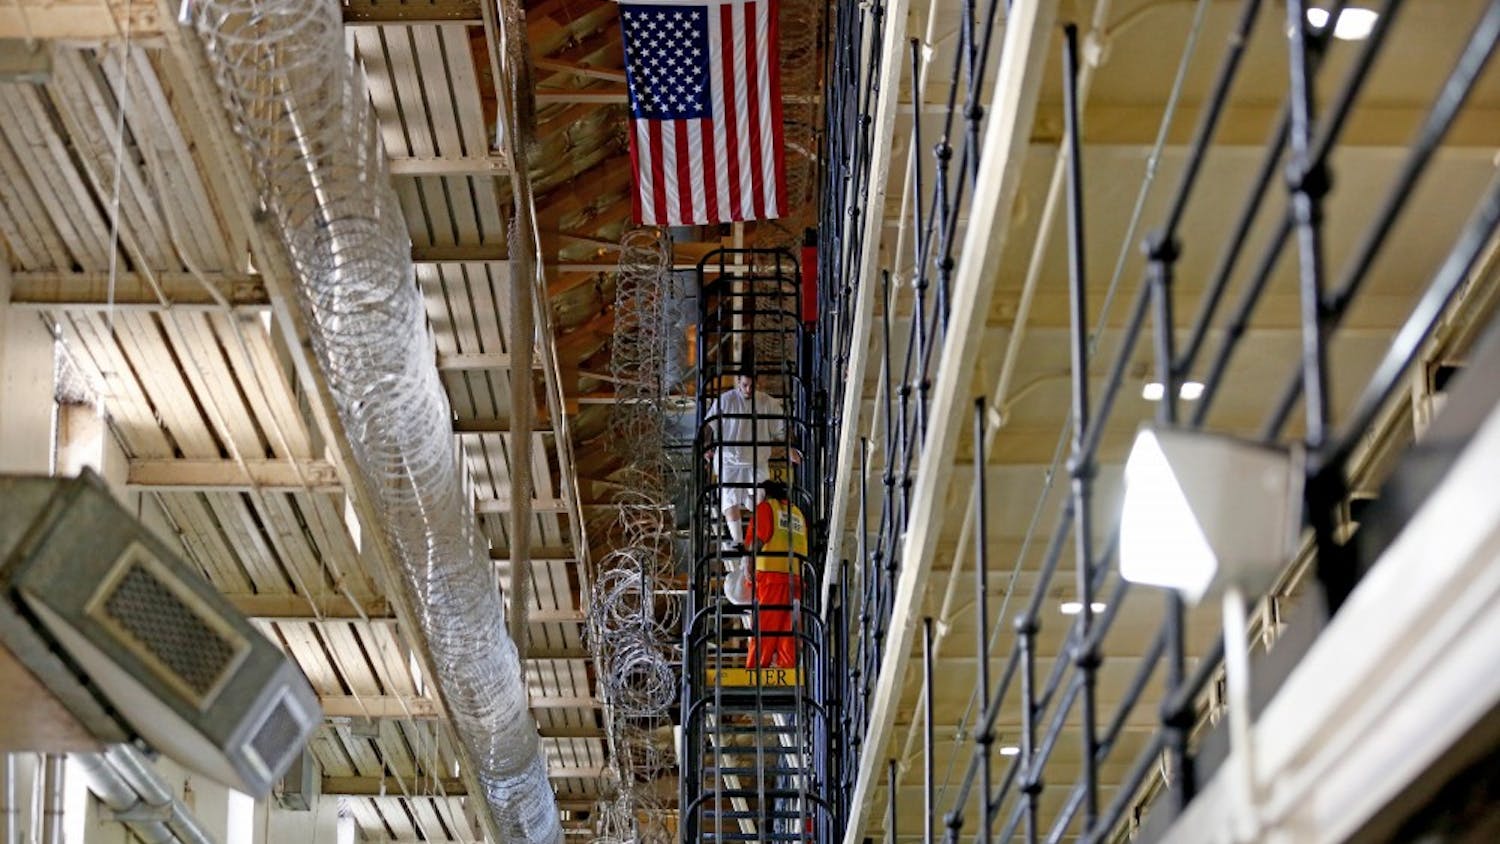 East Block at San Quentin State Prison, San Quentin, Calif., on Aug. 16, 2016. San Quentin opened in July 1852. It is the oldest prison in California. (Gary Coronado/Los Angeles Times/TNS)